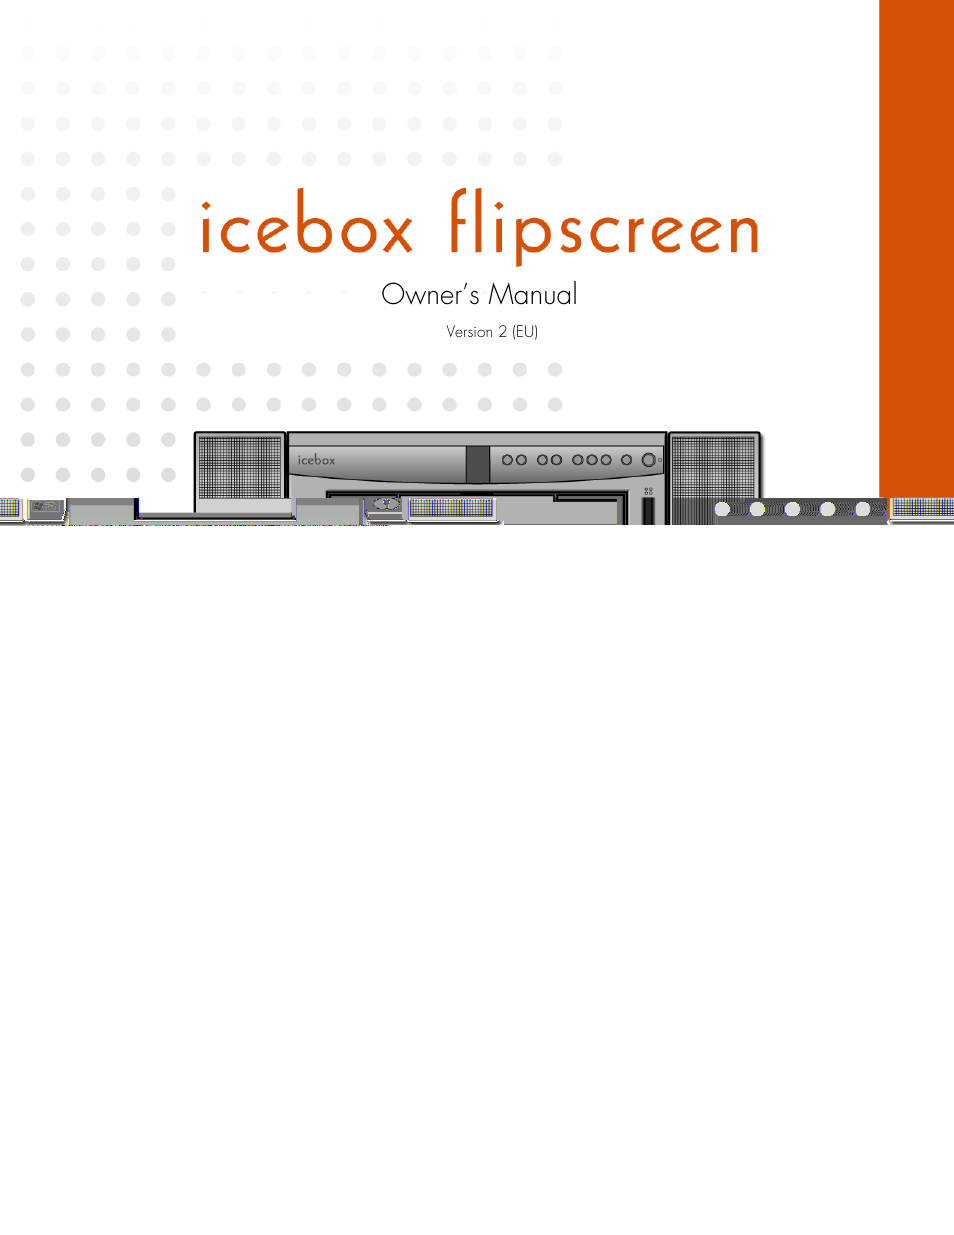 iCEBOX iBOX flipscreen User Manual | 72 pages